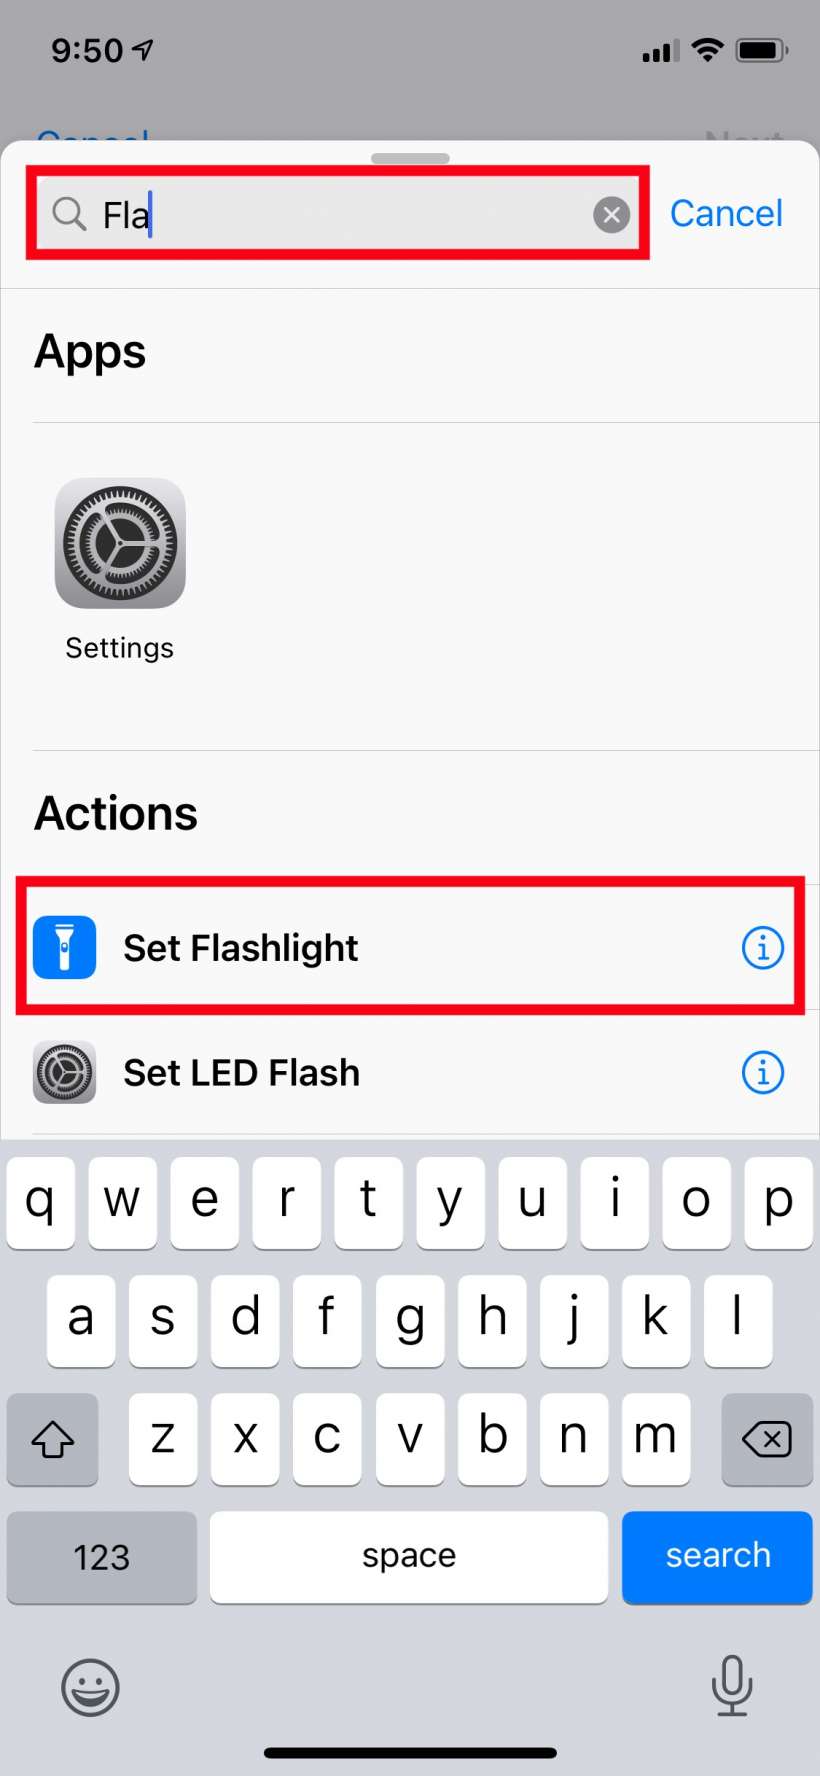 How to use flashlight with Back Tap on iPhone in iOS 14.